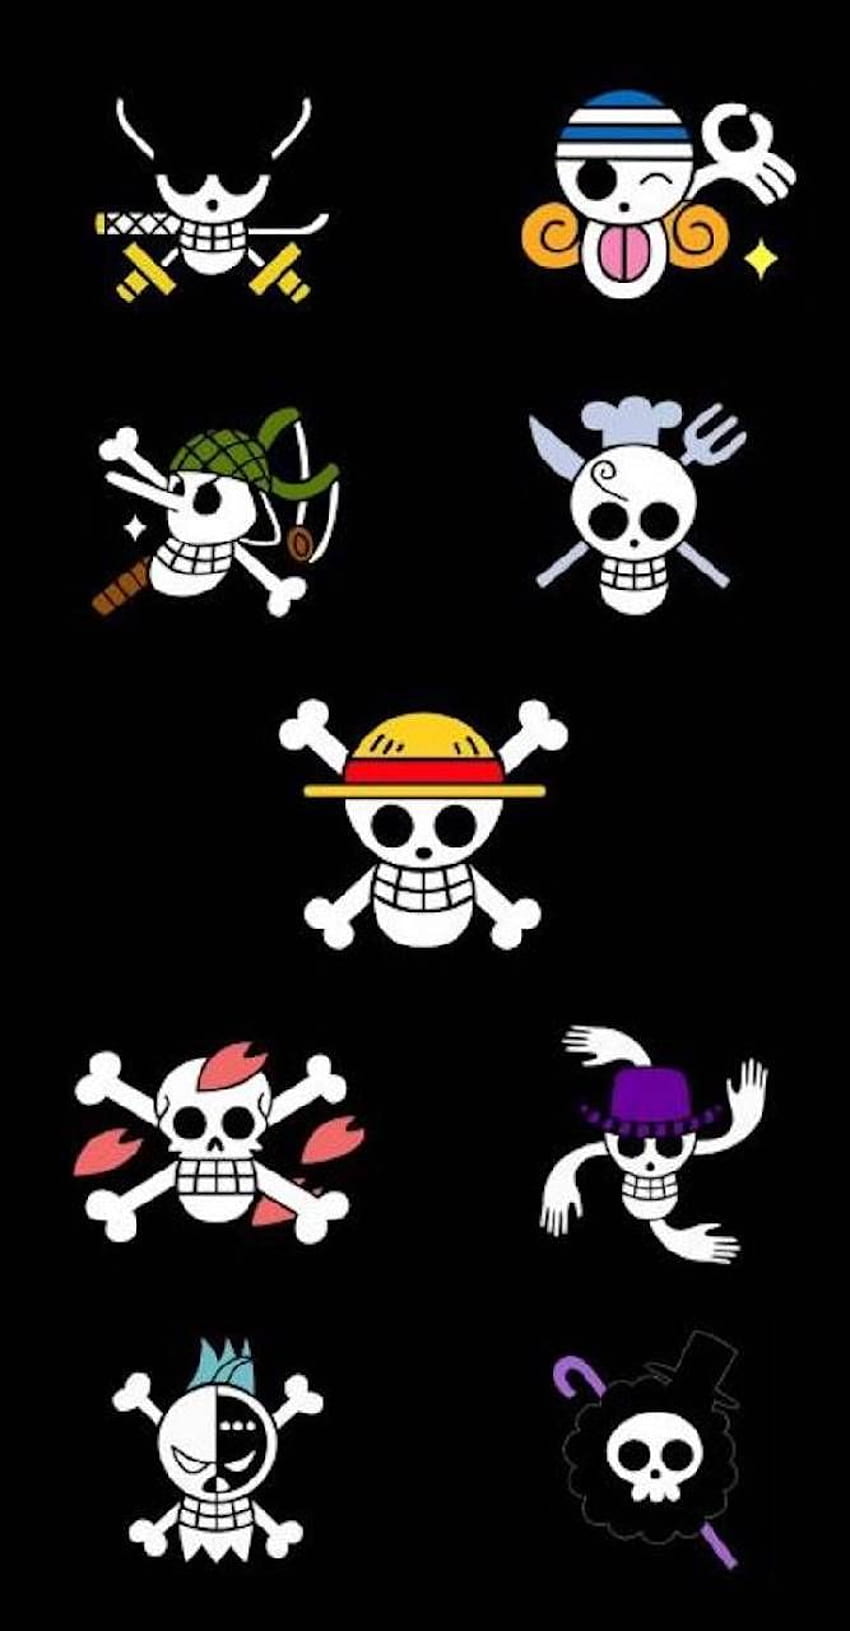 One piece icons by Girgilero - 61 now. Browse millions of p. One piece iphone, Manga anime one piece, One piece logo HD phone wallpaper